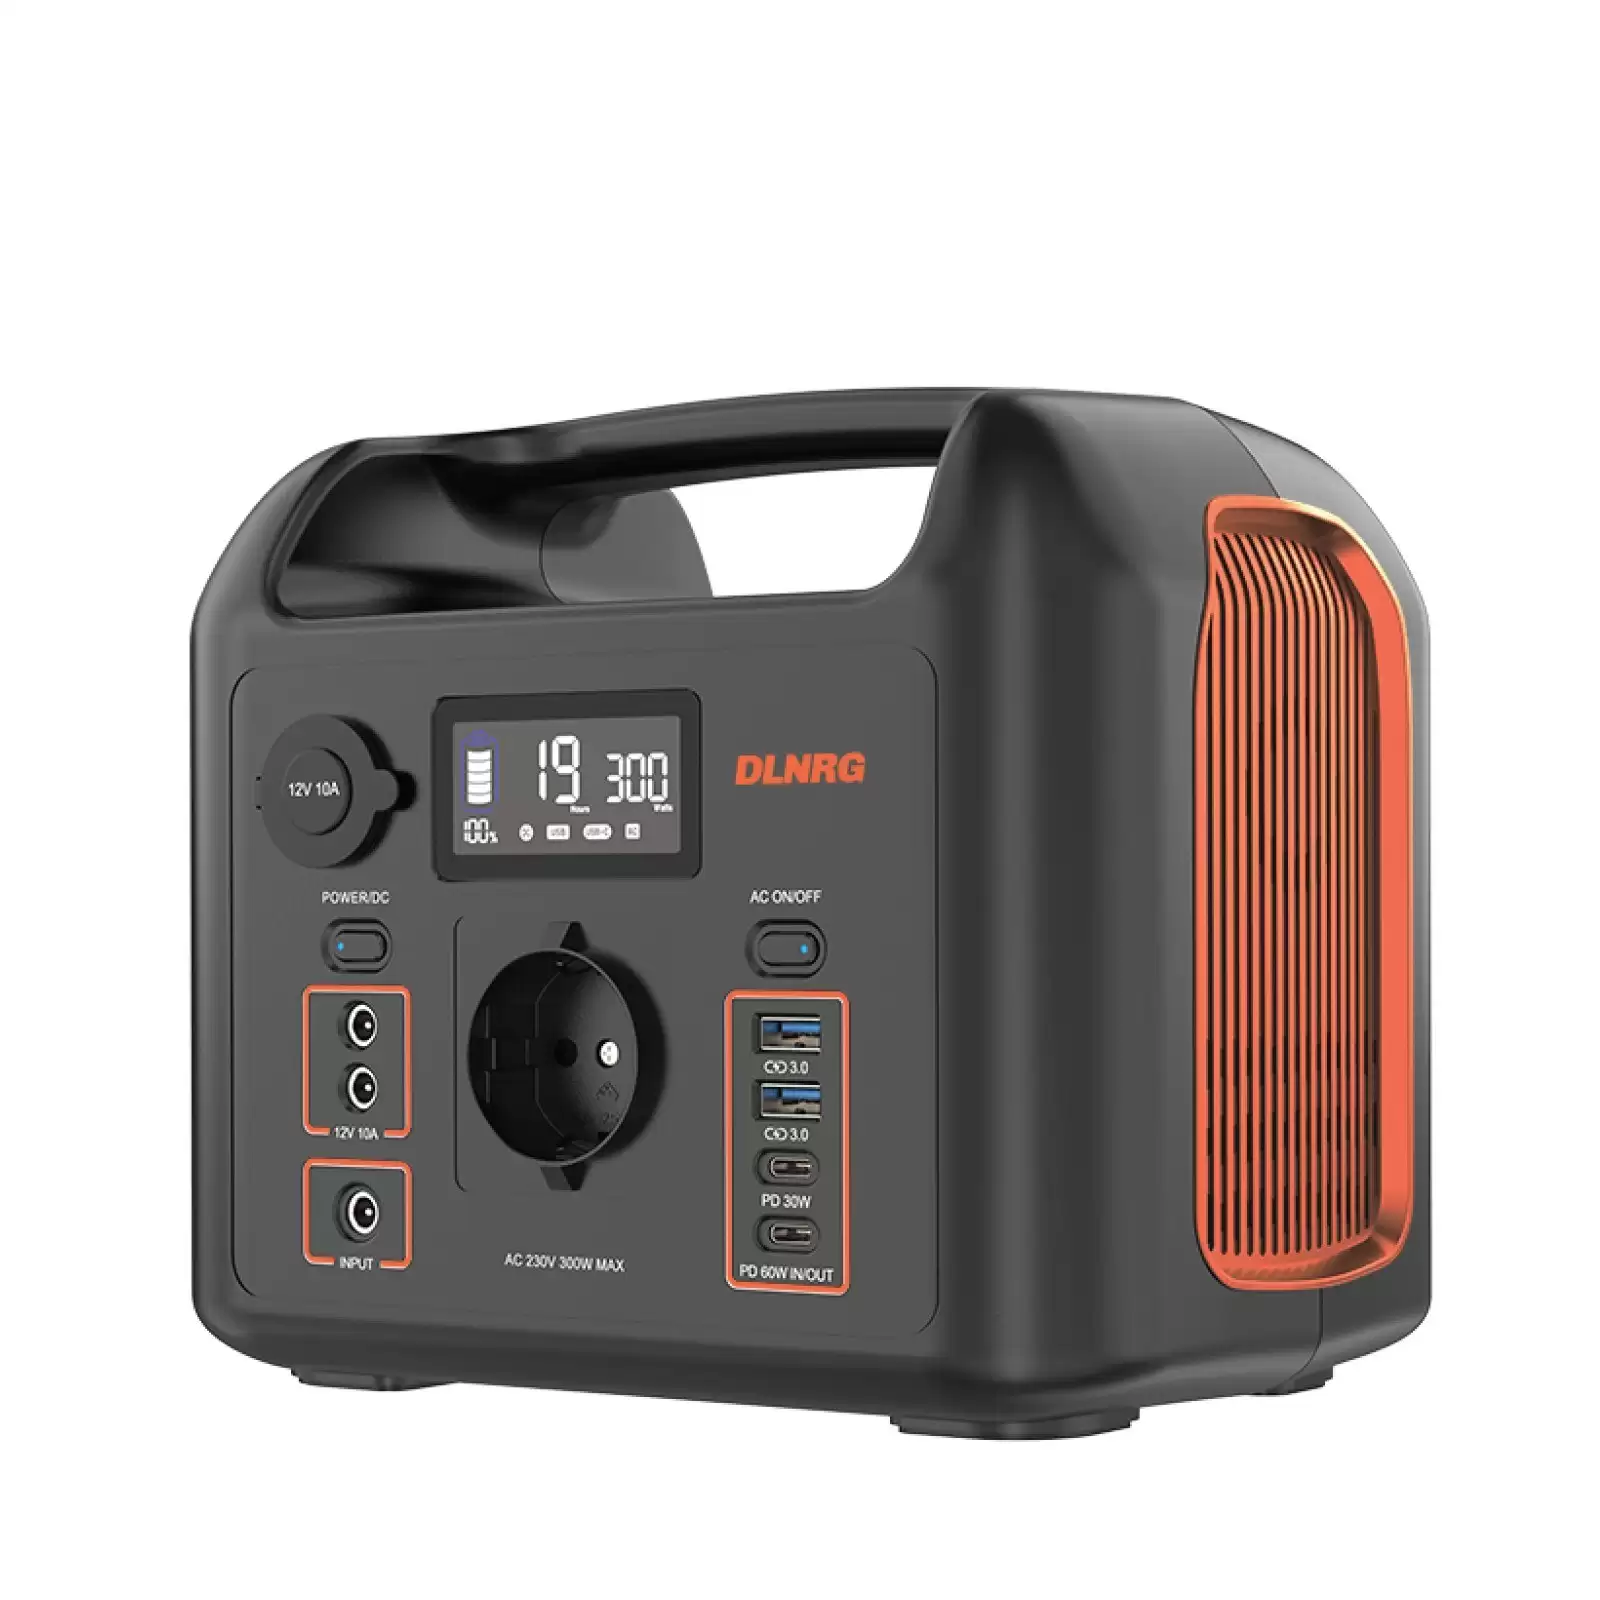 Pay Only € 102.29 For Dlnrg Pd320 Portable Power Station With This Discount Coupon At Cafago